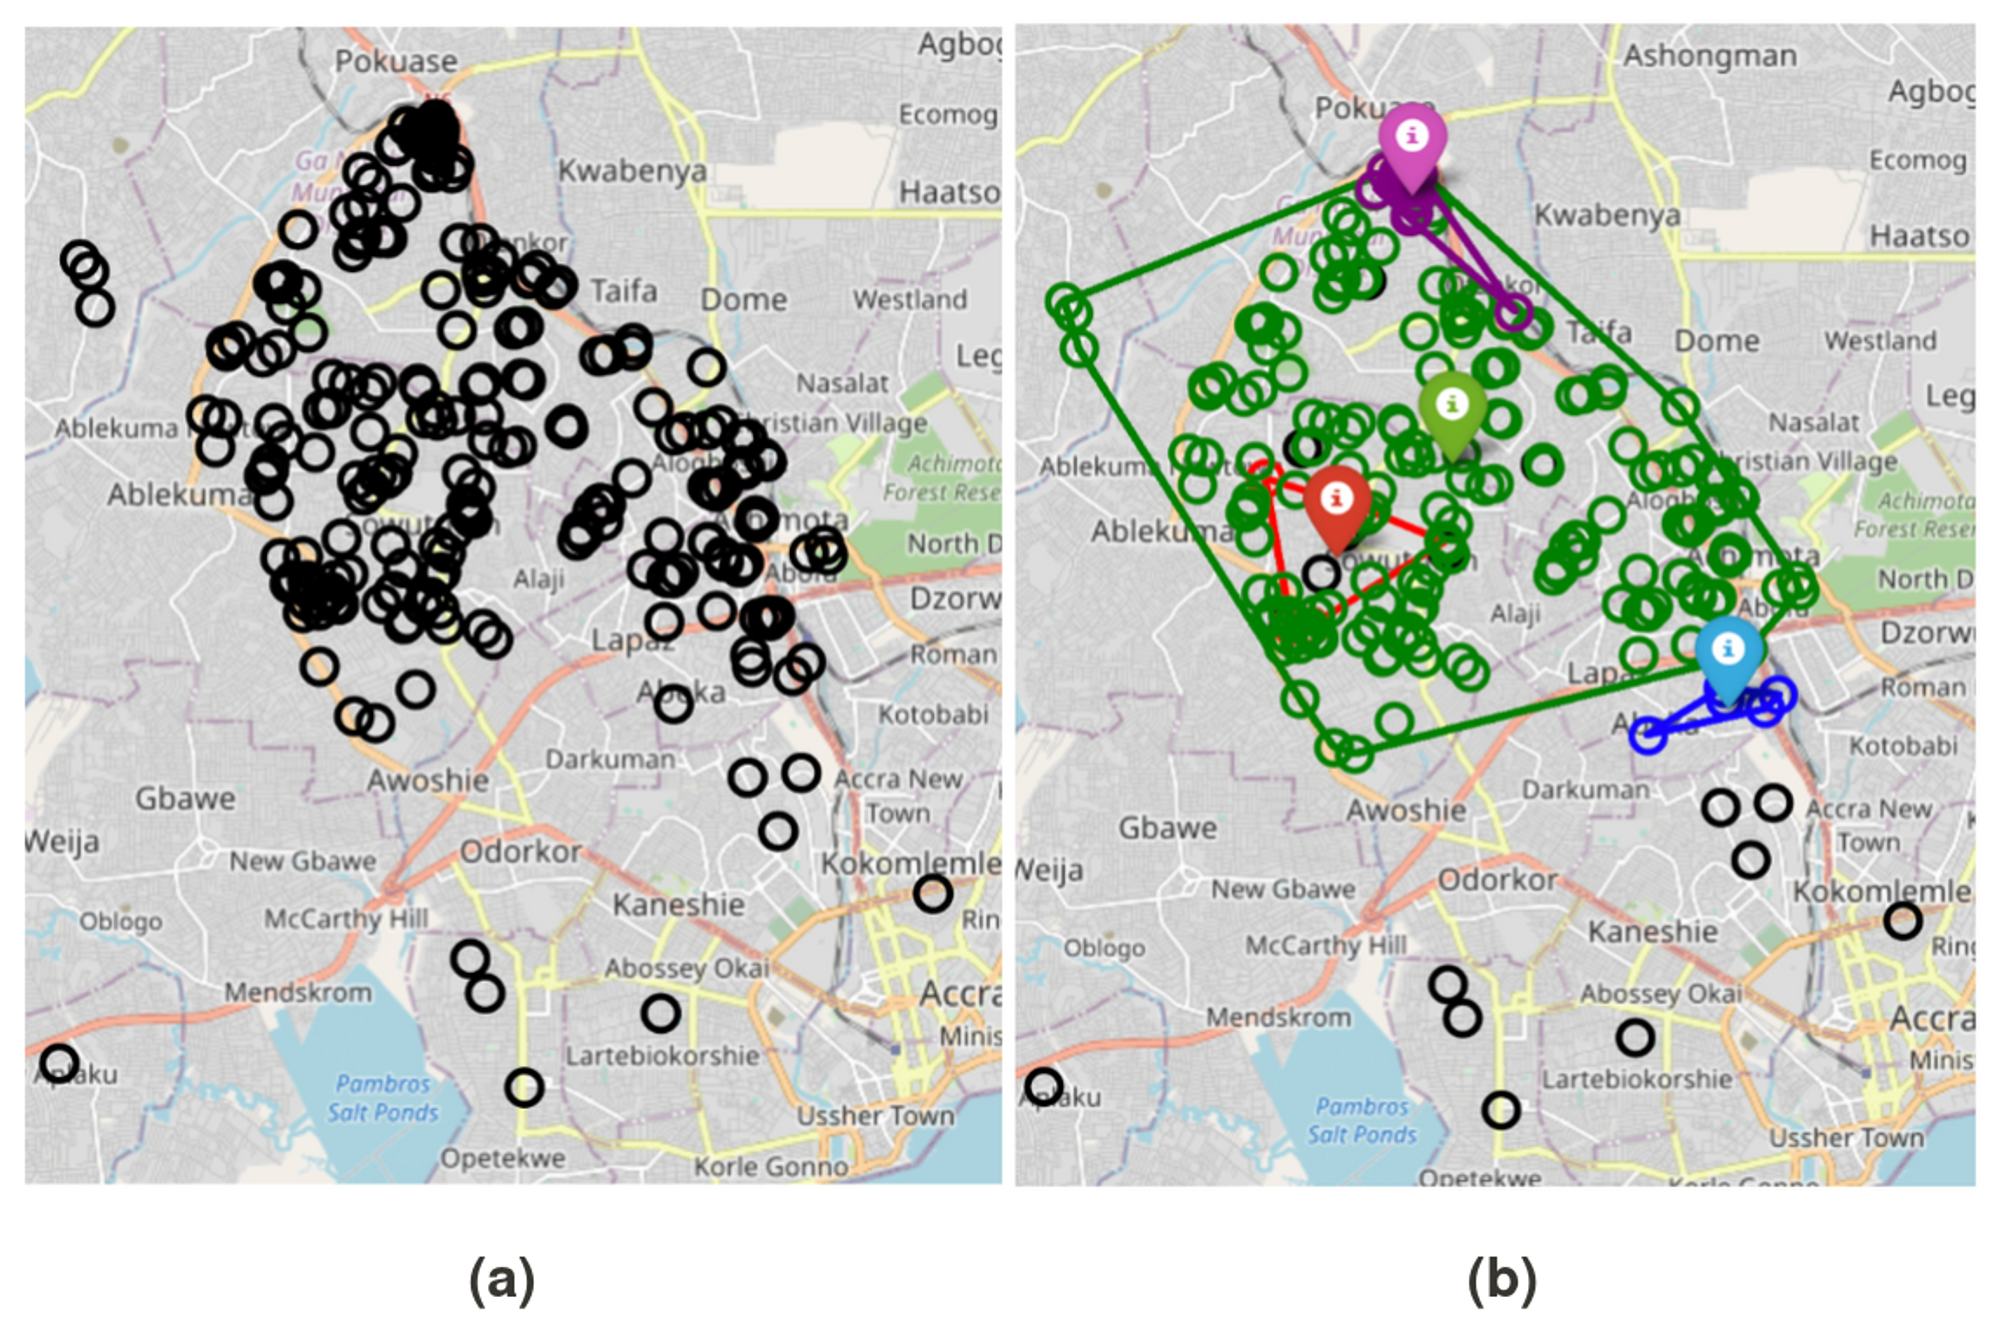 Figure 5: Localized vs large scale outages. Map of clustered outage reports for between "2021-10-01" to "2021-10-02" in Accra. The larger cluster(mapped in green) likely represents an MV/HV outage which affected a large geographical area while the smaller ones(red, purple, and blue) represent LV outages. Determining and differentiating MV/LV outages from LV outages can help us tell where these outages occur in the grid infrastructure. We may be able to tell whether an outage is due to a transformer failure or due to a failure higher upstream in the MV/LV lines. We could also tell if an outage is likely due to a generation/transmission failure or issues at the distribution level.